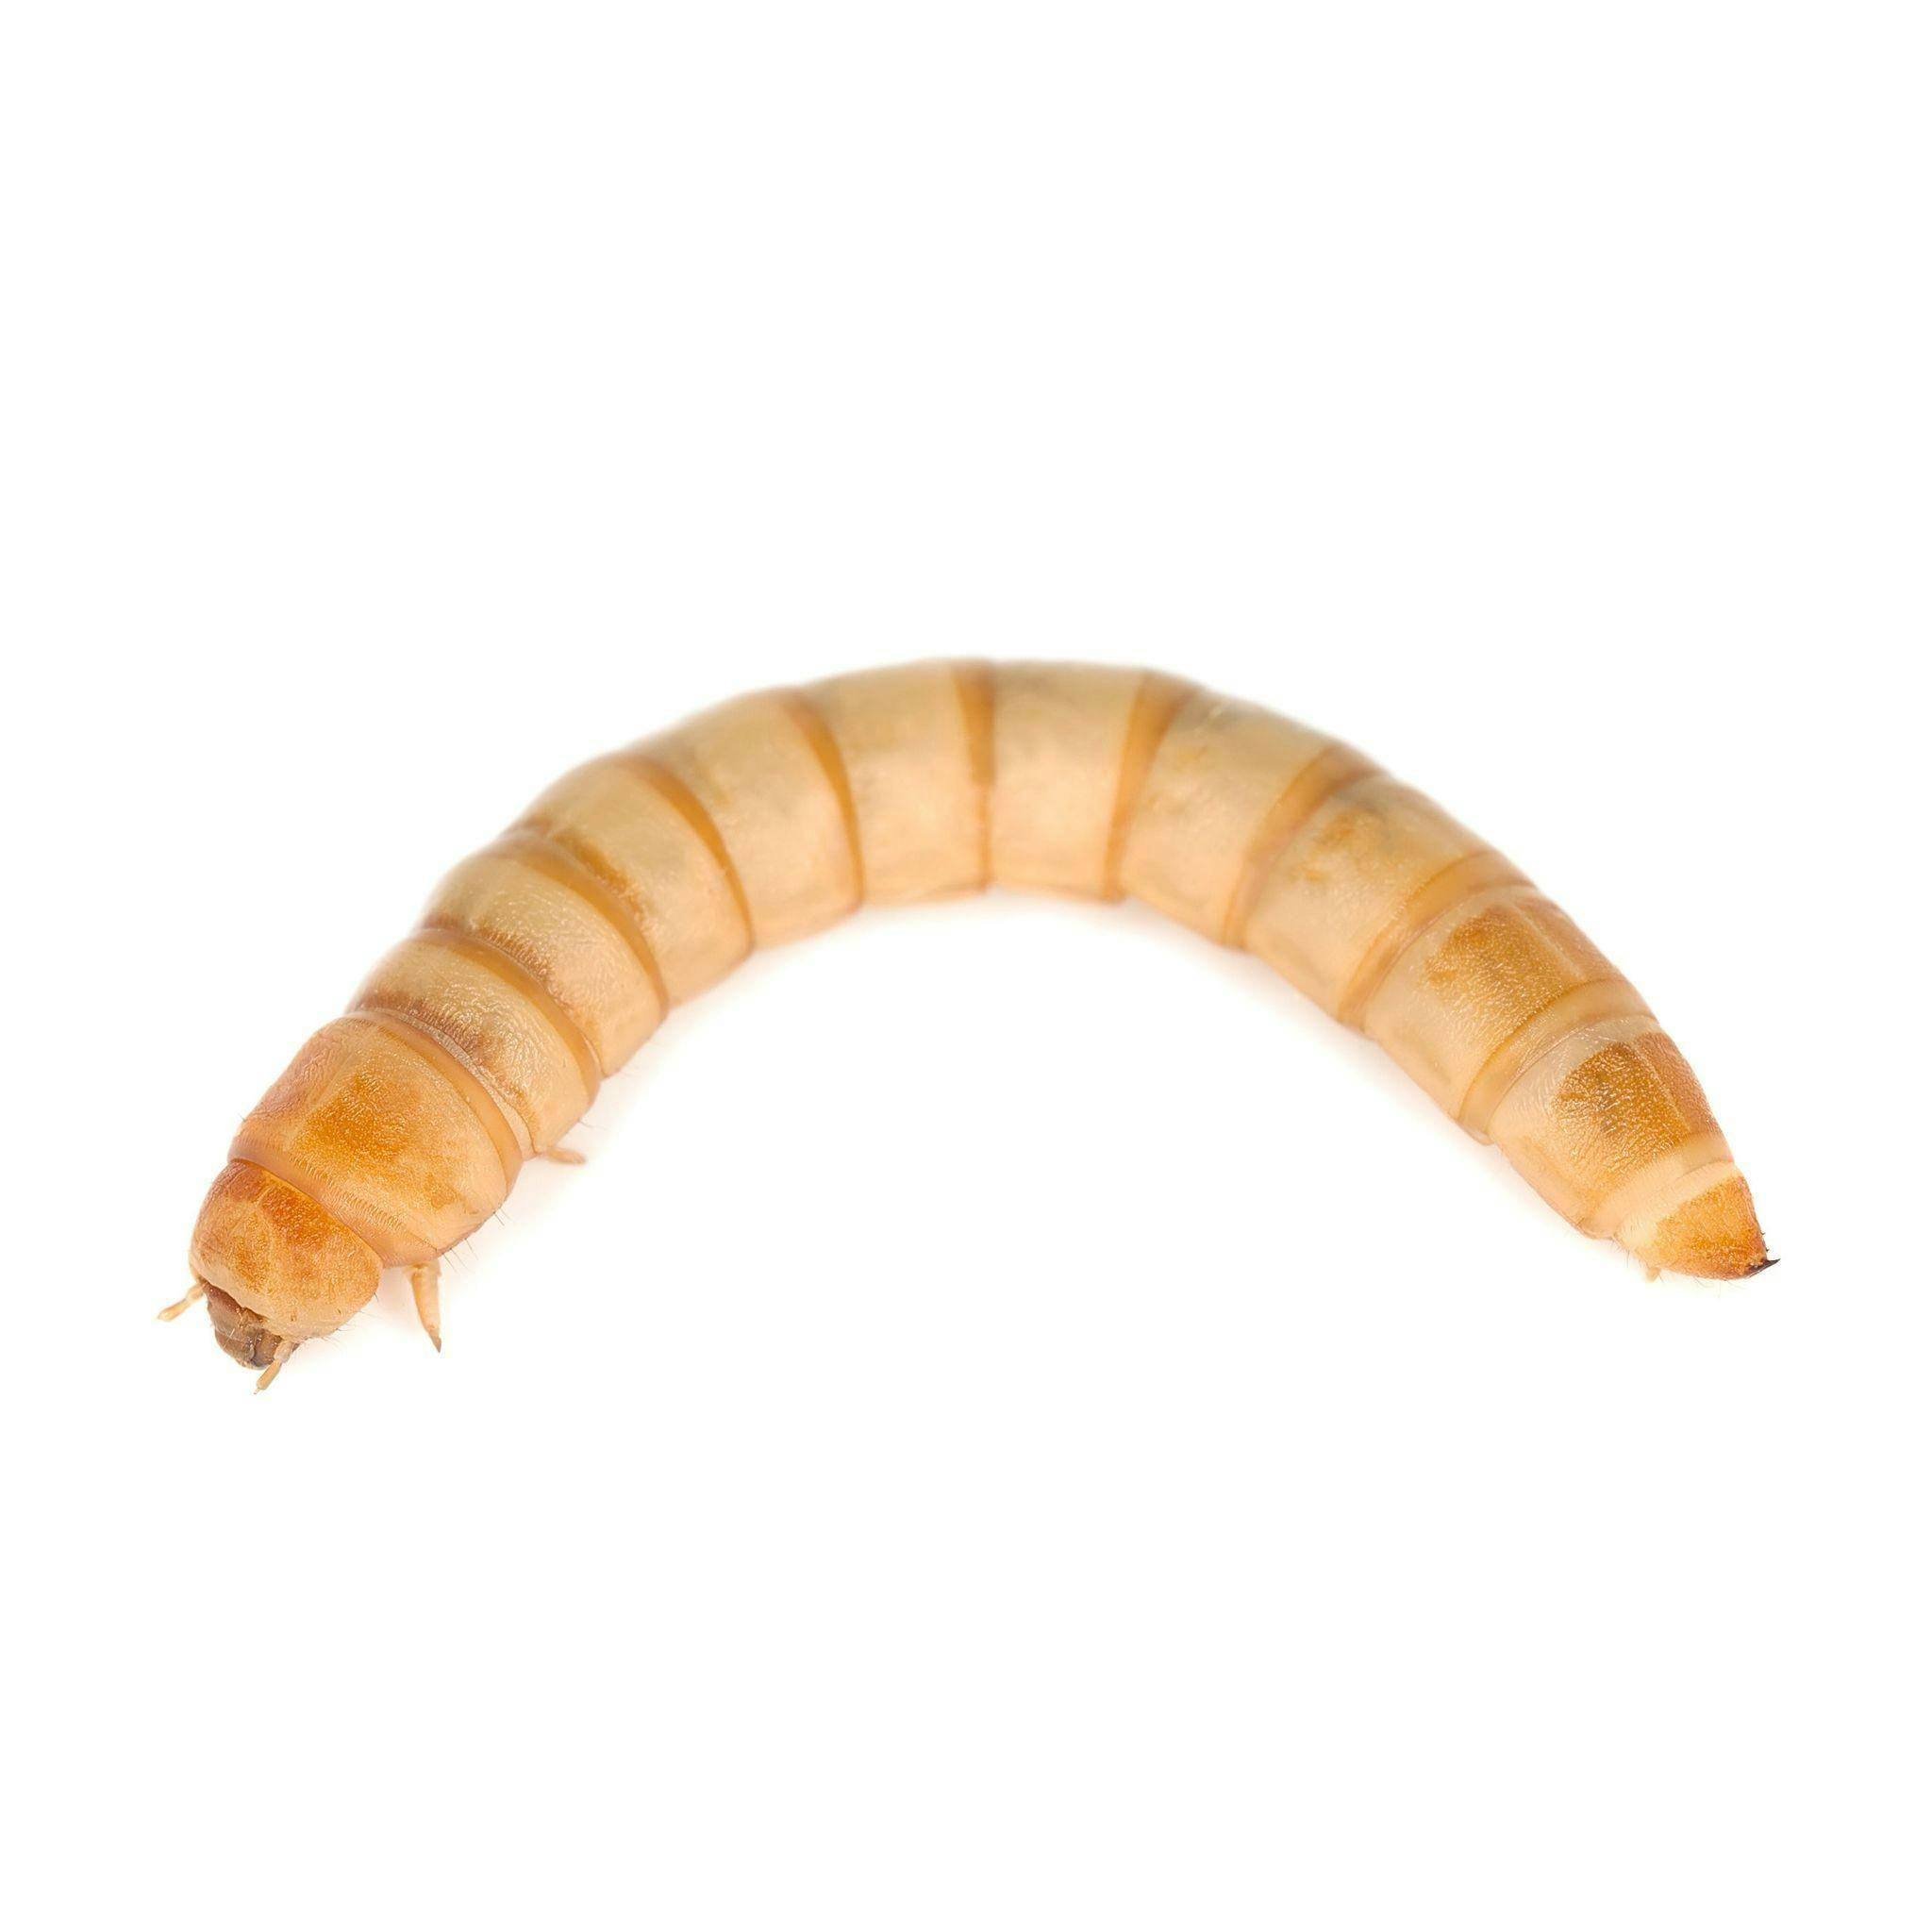 Image 1 for Live Mealworms (500) by The Bug Factory